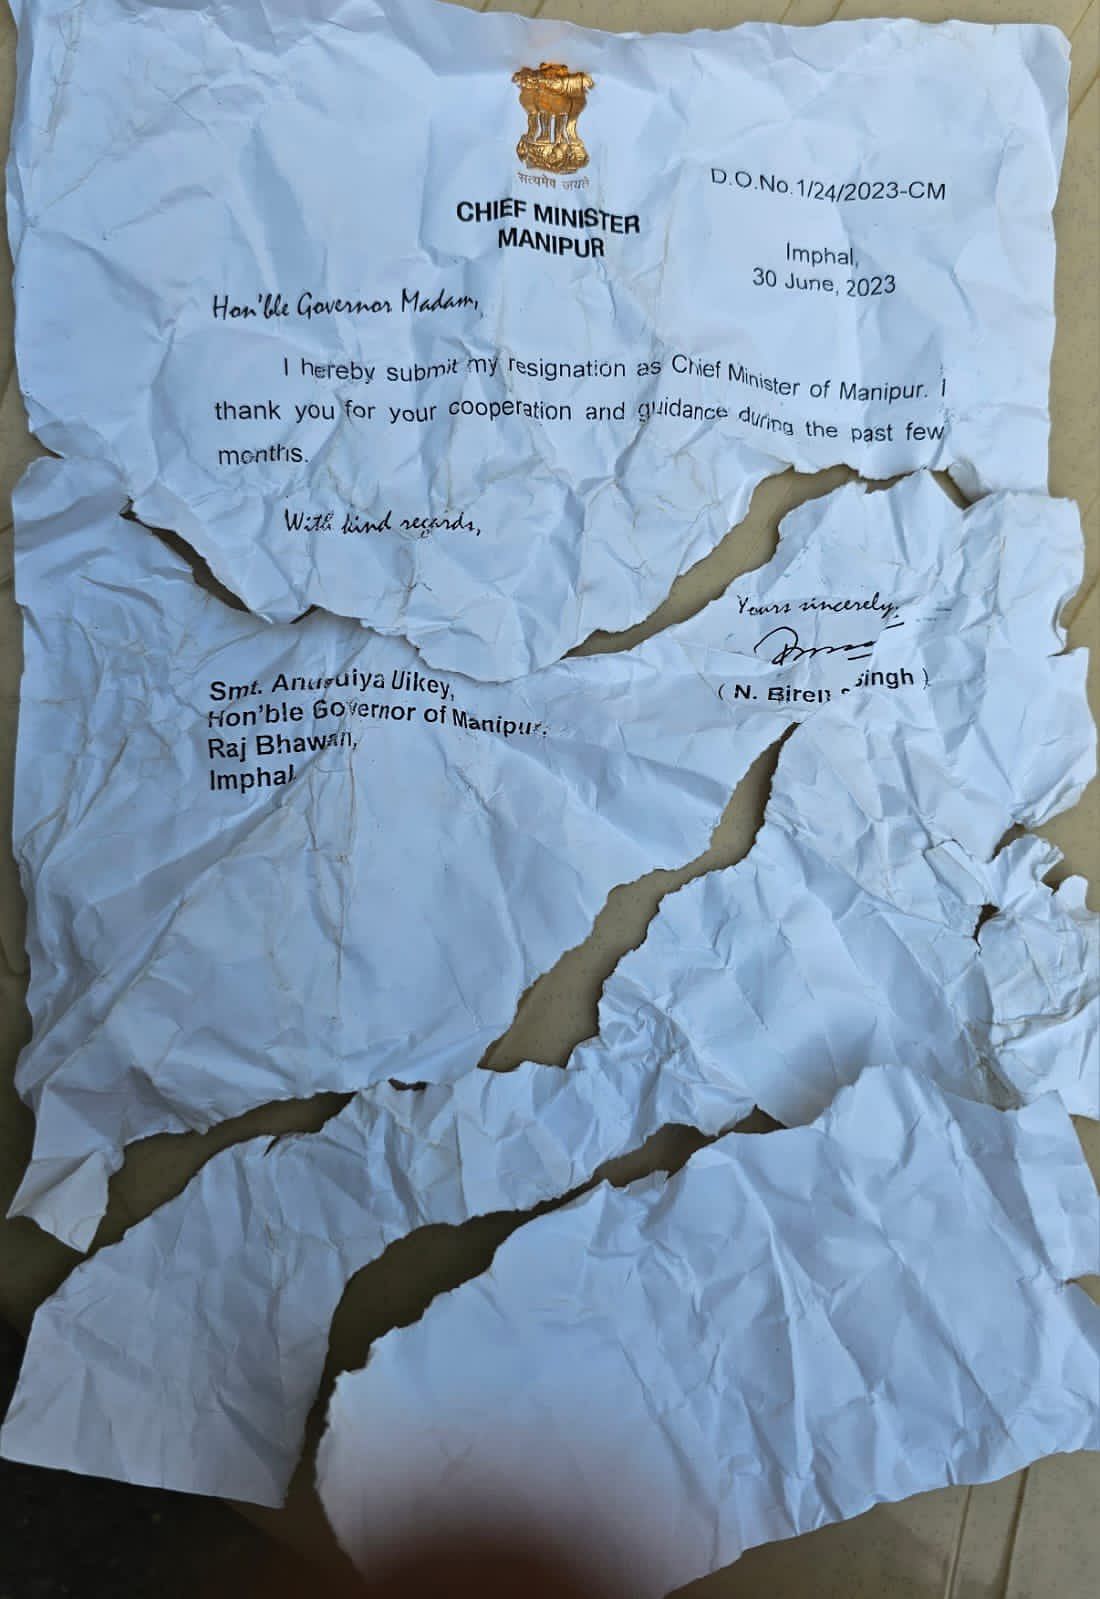 A photo of the torn resignation latter. Credit: Special Arrangement